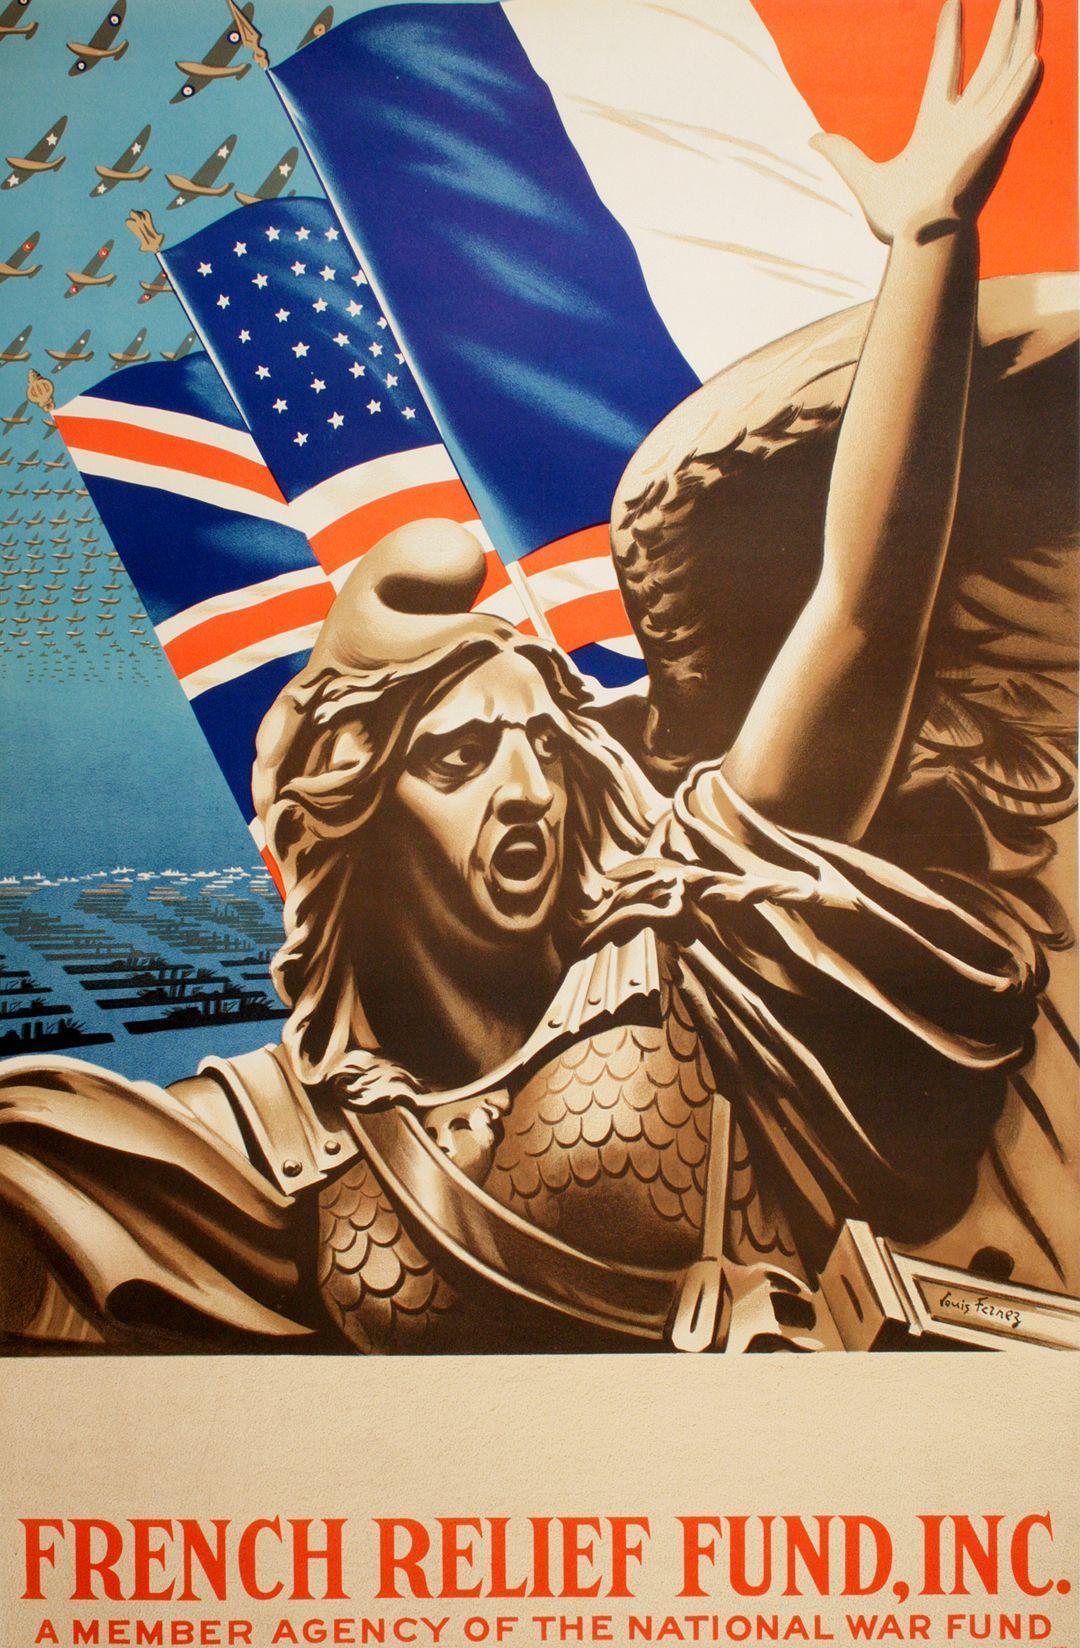 Original French Relief Fund Poster by Louis Fernez c1943 WWII